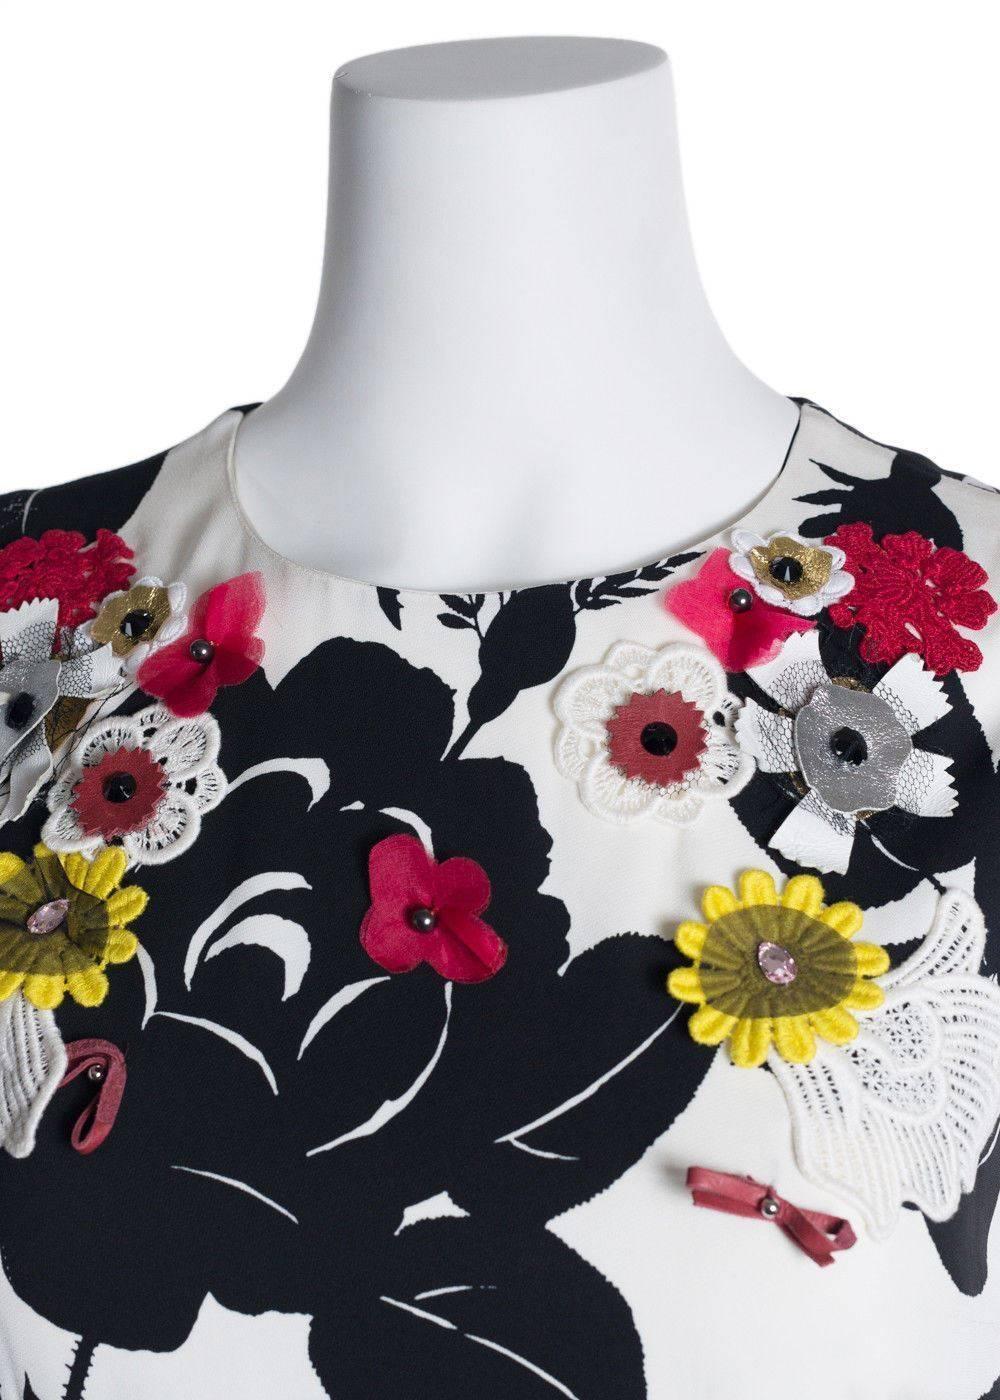 Women's Dolce&Gabbana Black and White Floral Embroidered Sleeveless Dress